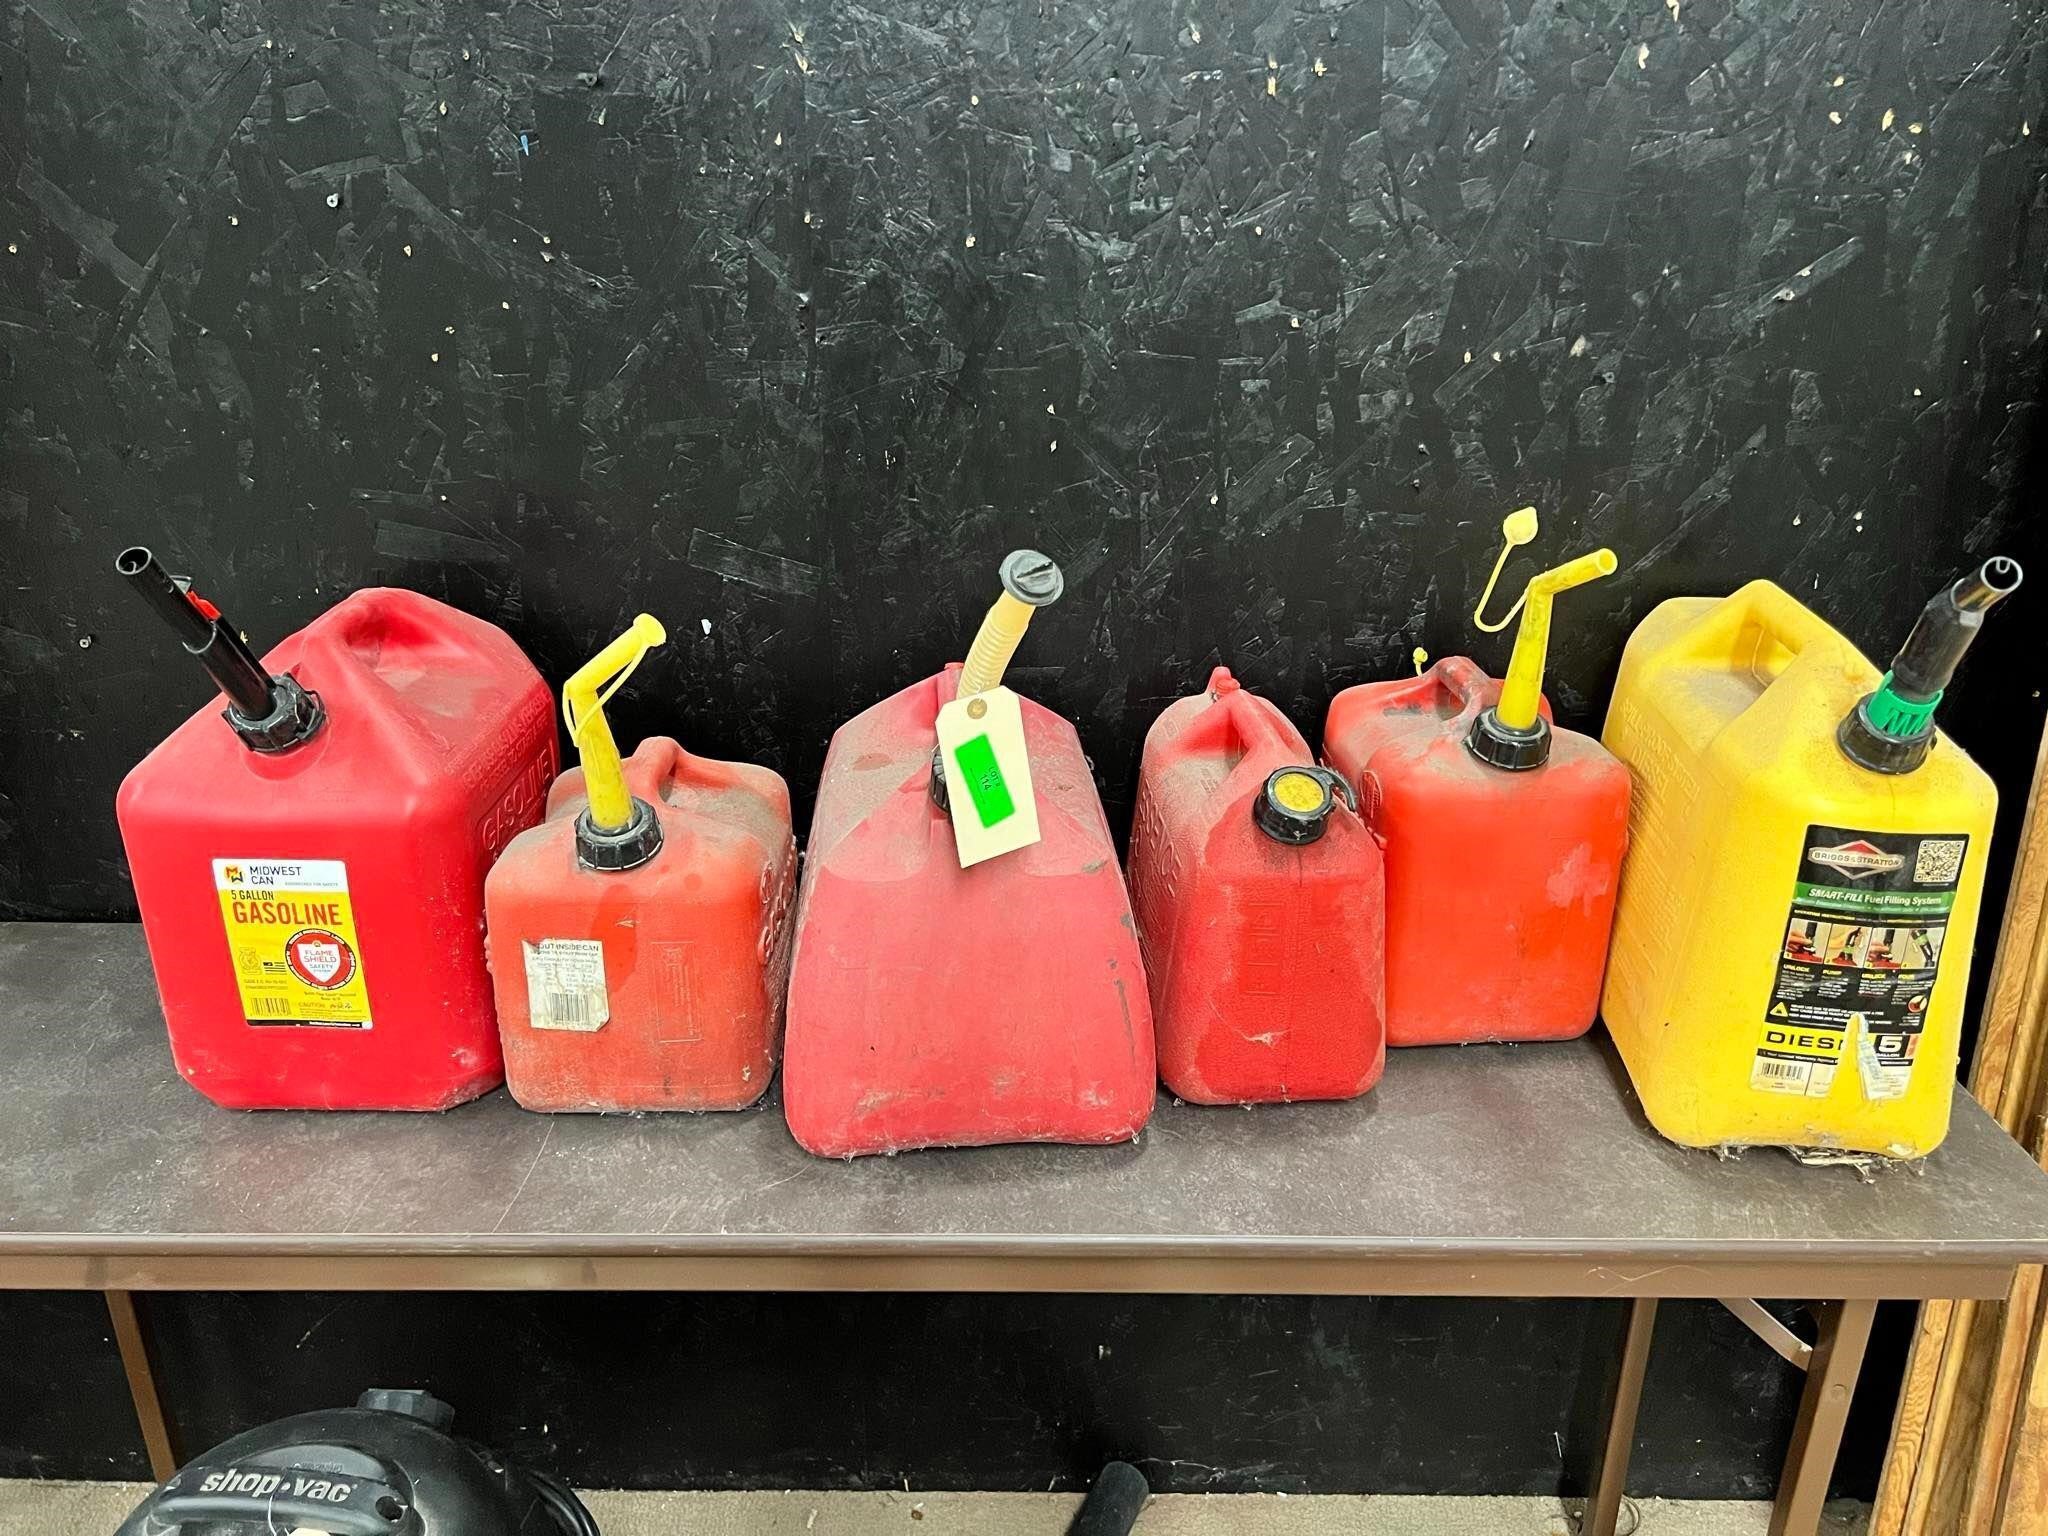 Lot of 6 Gas/Diesel Cans